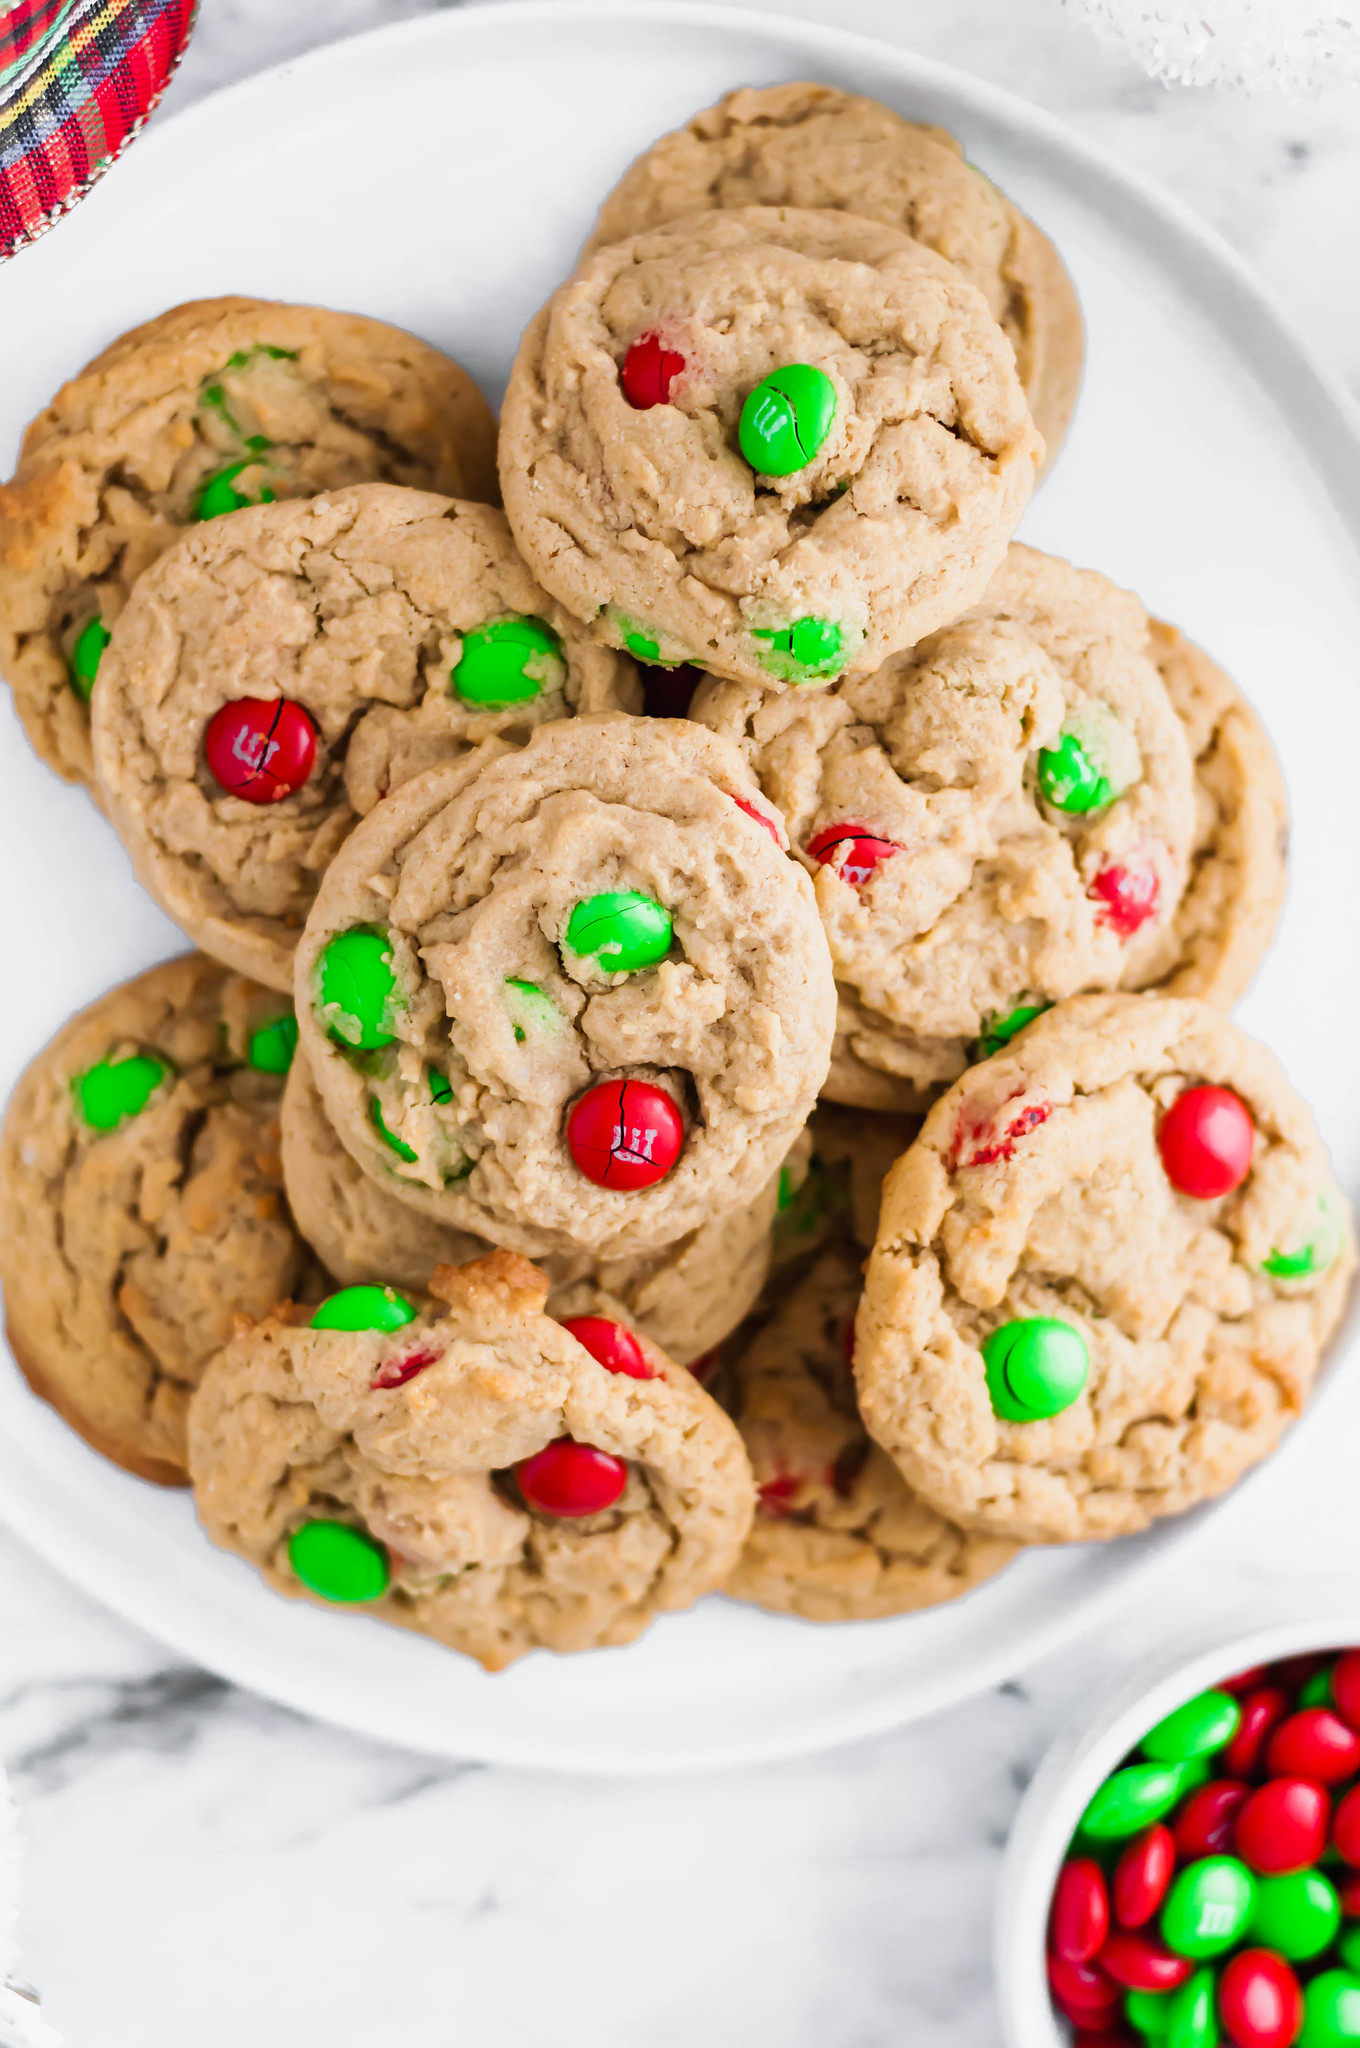 The classic peanut butter and chocolate combination is featured in these delicious Peanut Butter M&M Cookies. Perfect for all your holiday baking.